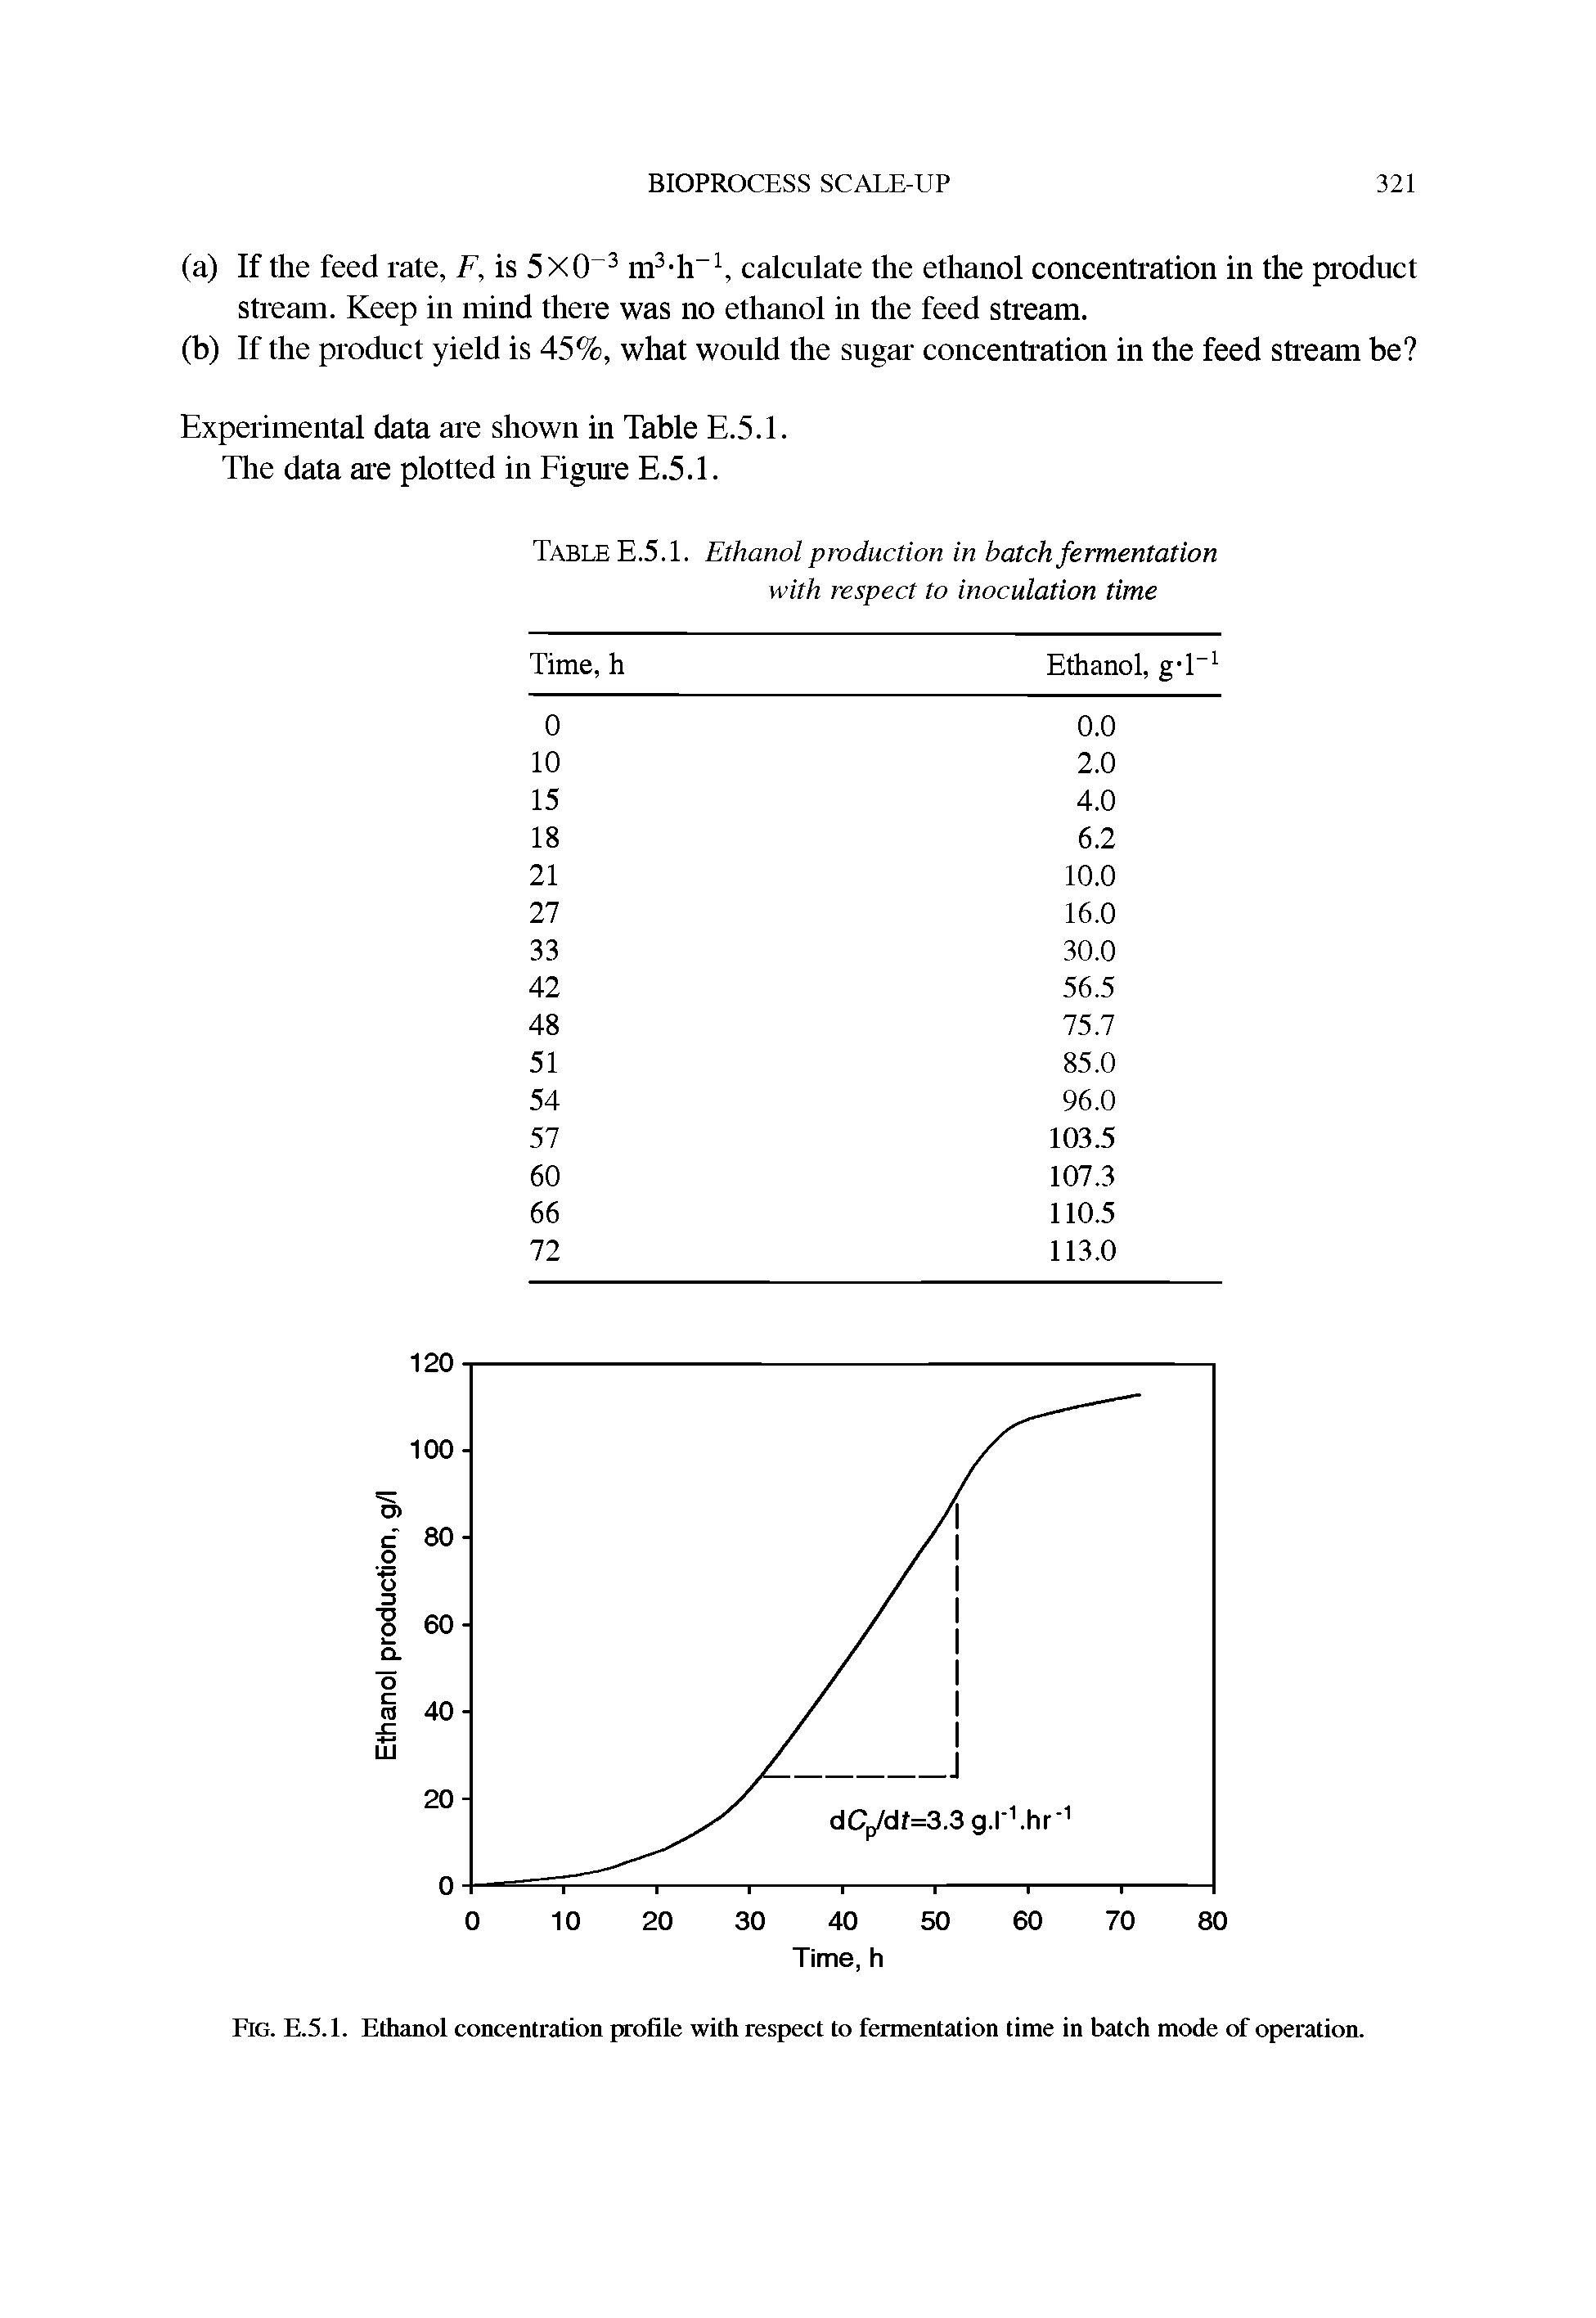 Fig. E.5.1. Ethanol concentration profile with respect to fermentation time in batch mode of operation.